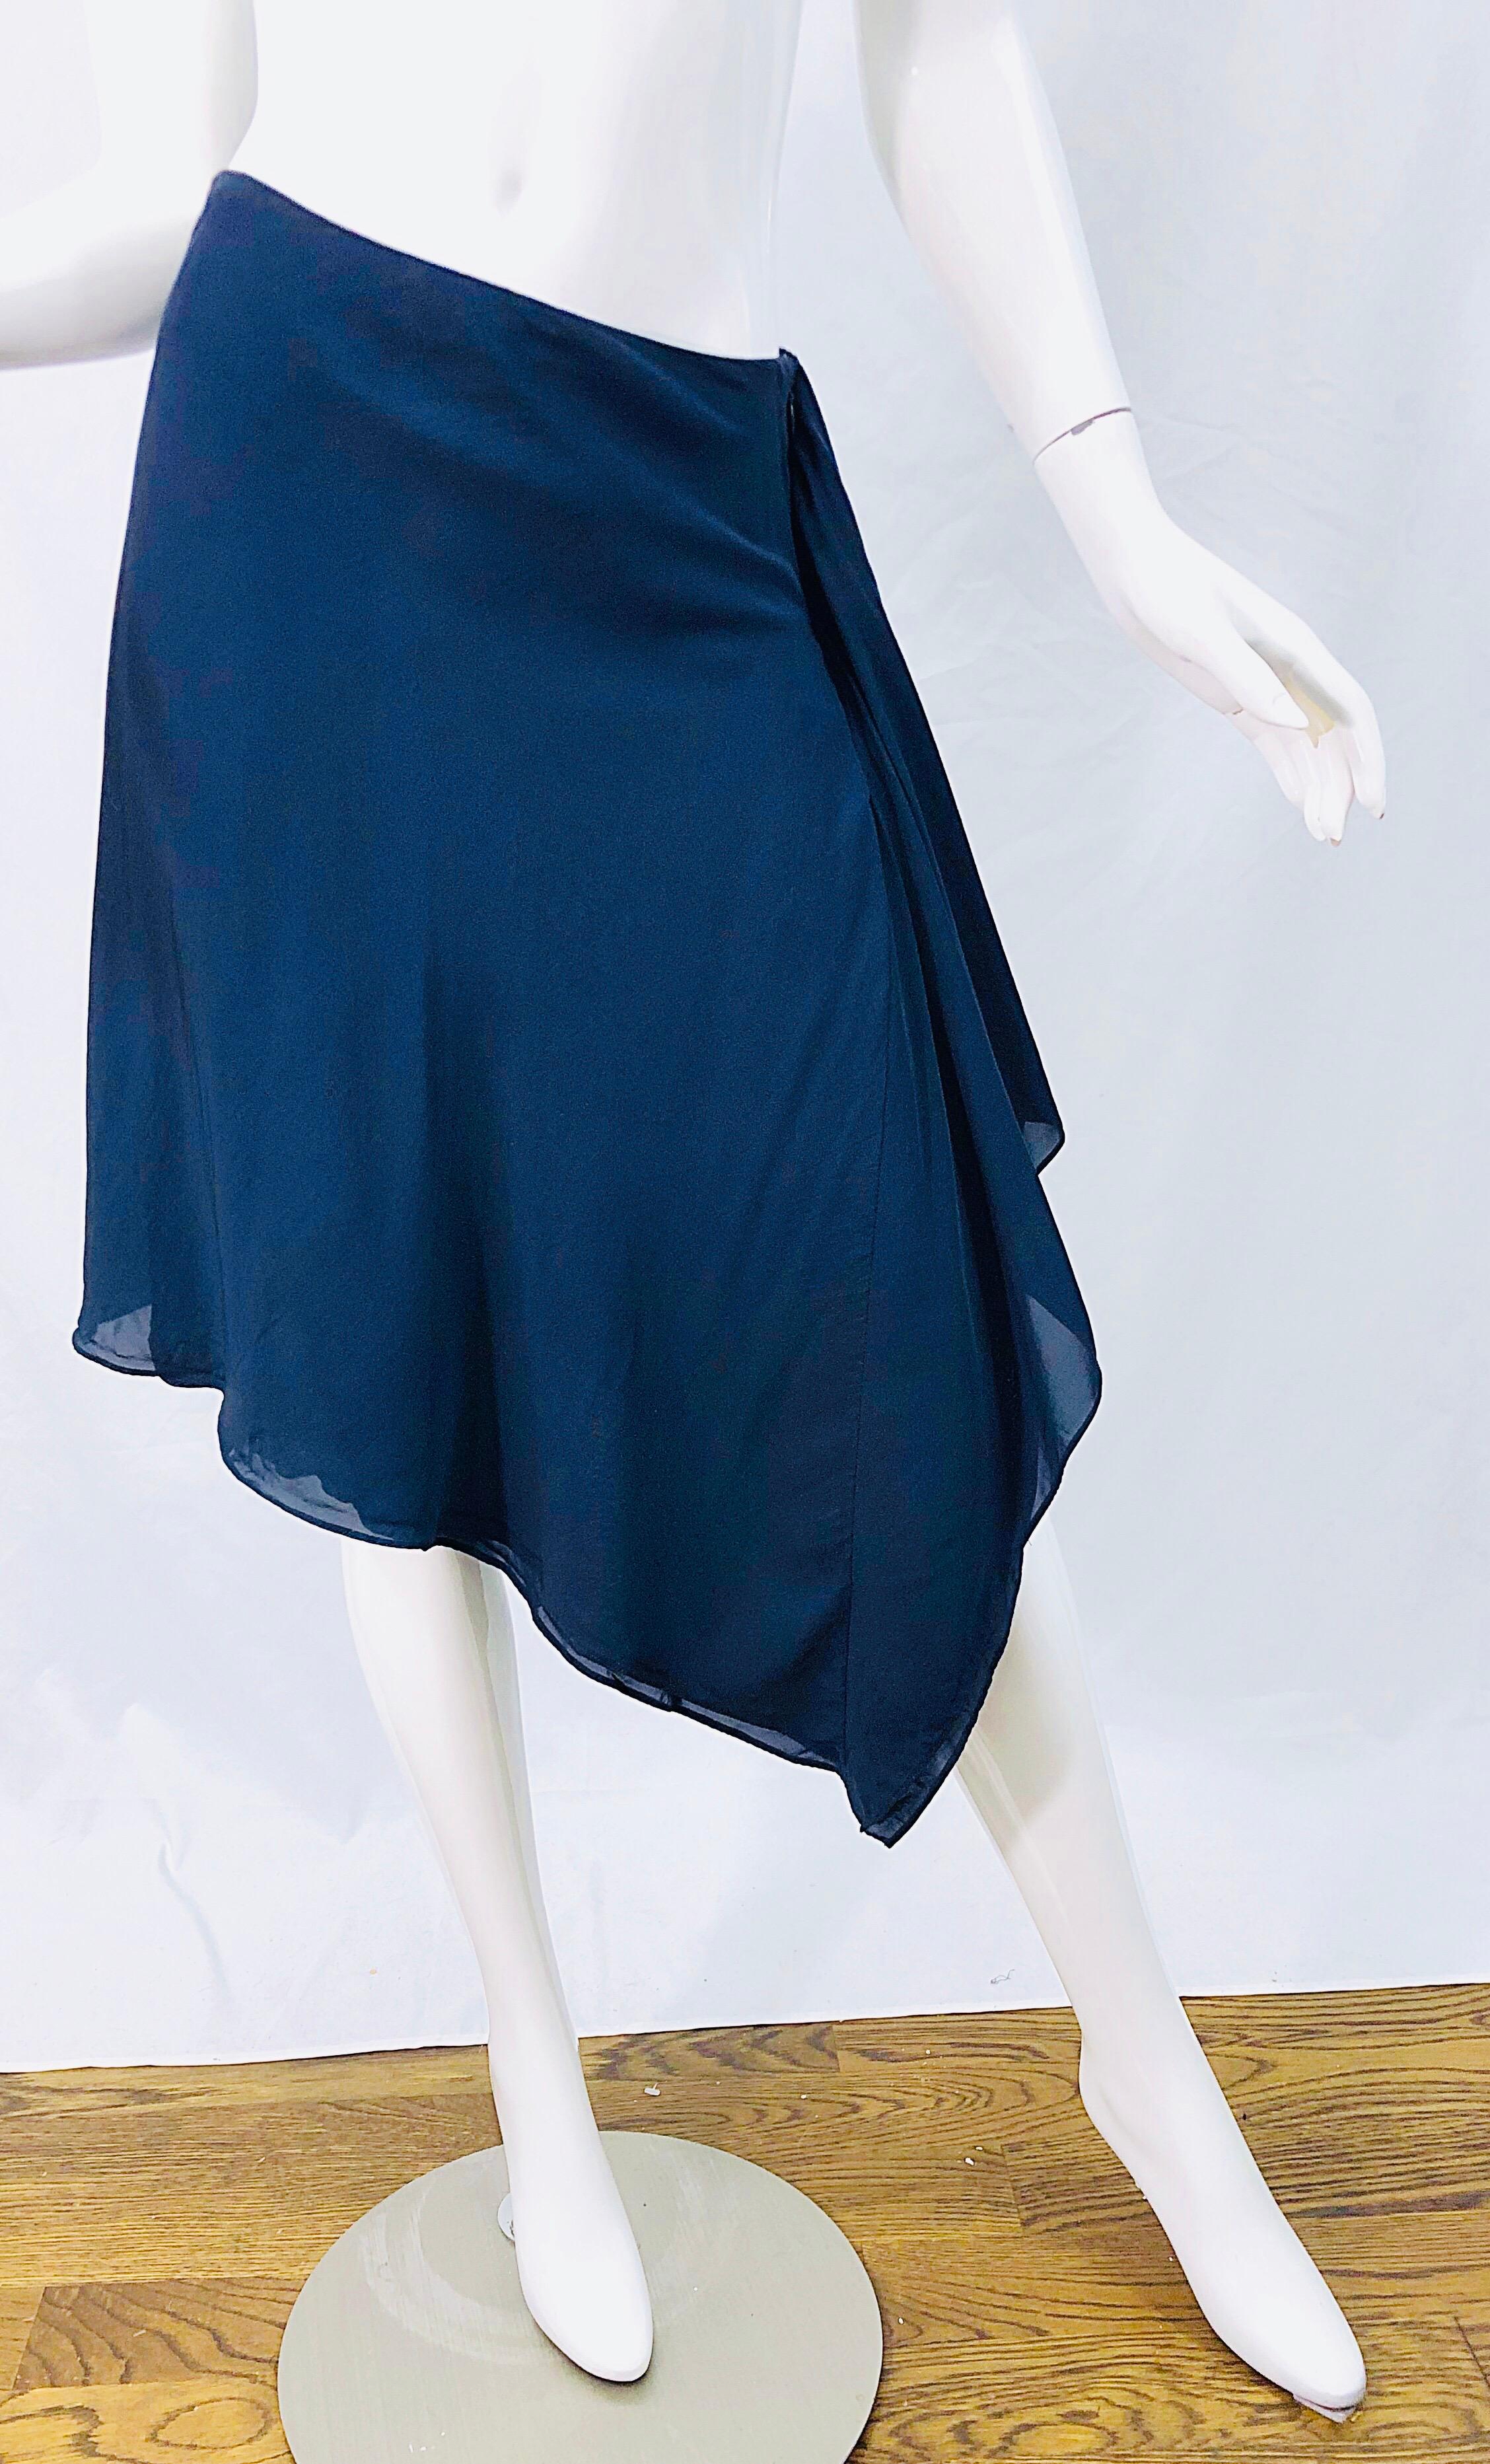 Chic late 1990s DONNA KARAN navy blue handkerchief hem rayon wrap skirt ! Features a dark navy color that is perfect for any time of year. Wrap style with interior button and hook-and-eye closure. Soft rayon fabric. 
Can easily be dressed up or